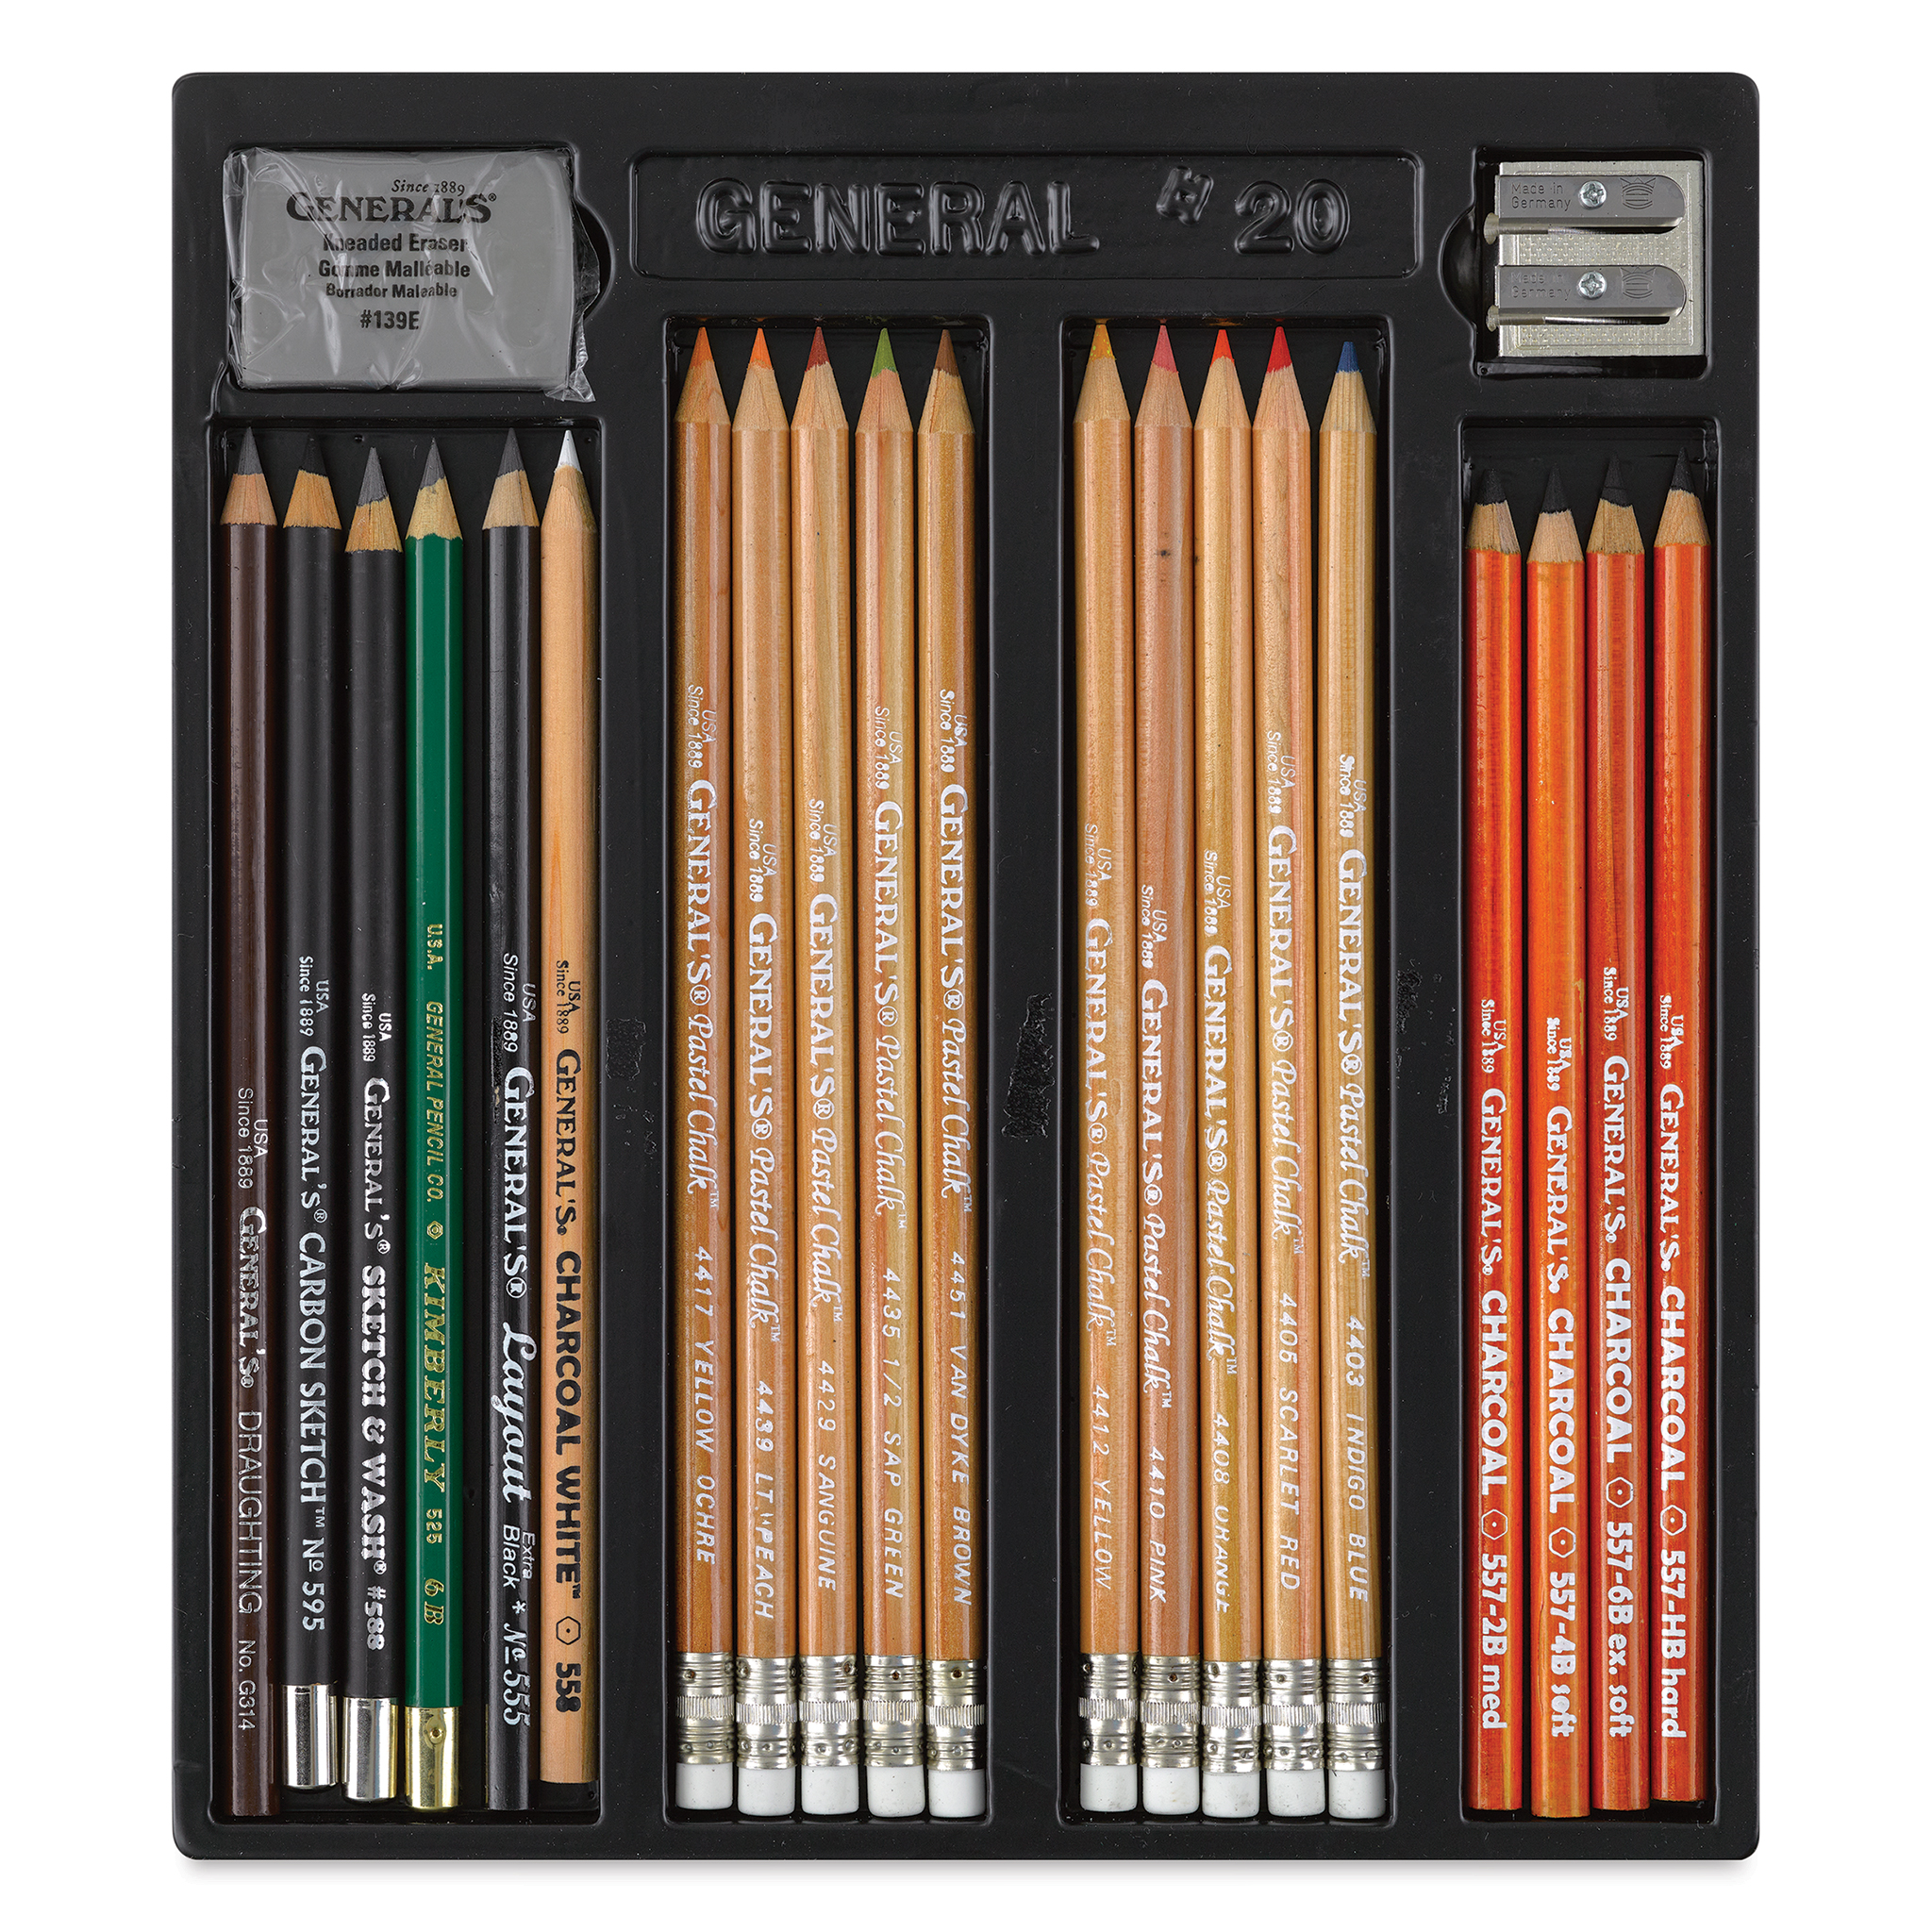 General's Drawing Class Essential Tools Kit - 13 count